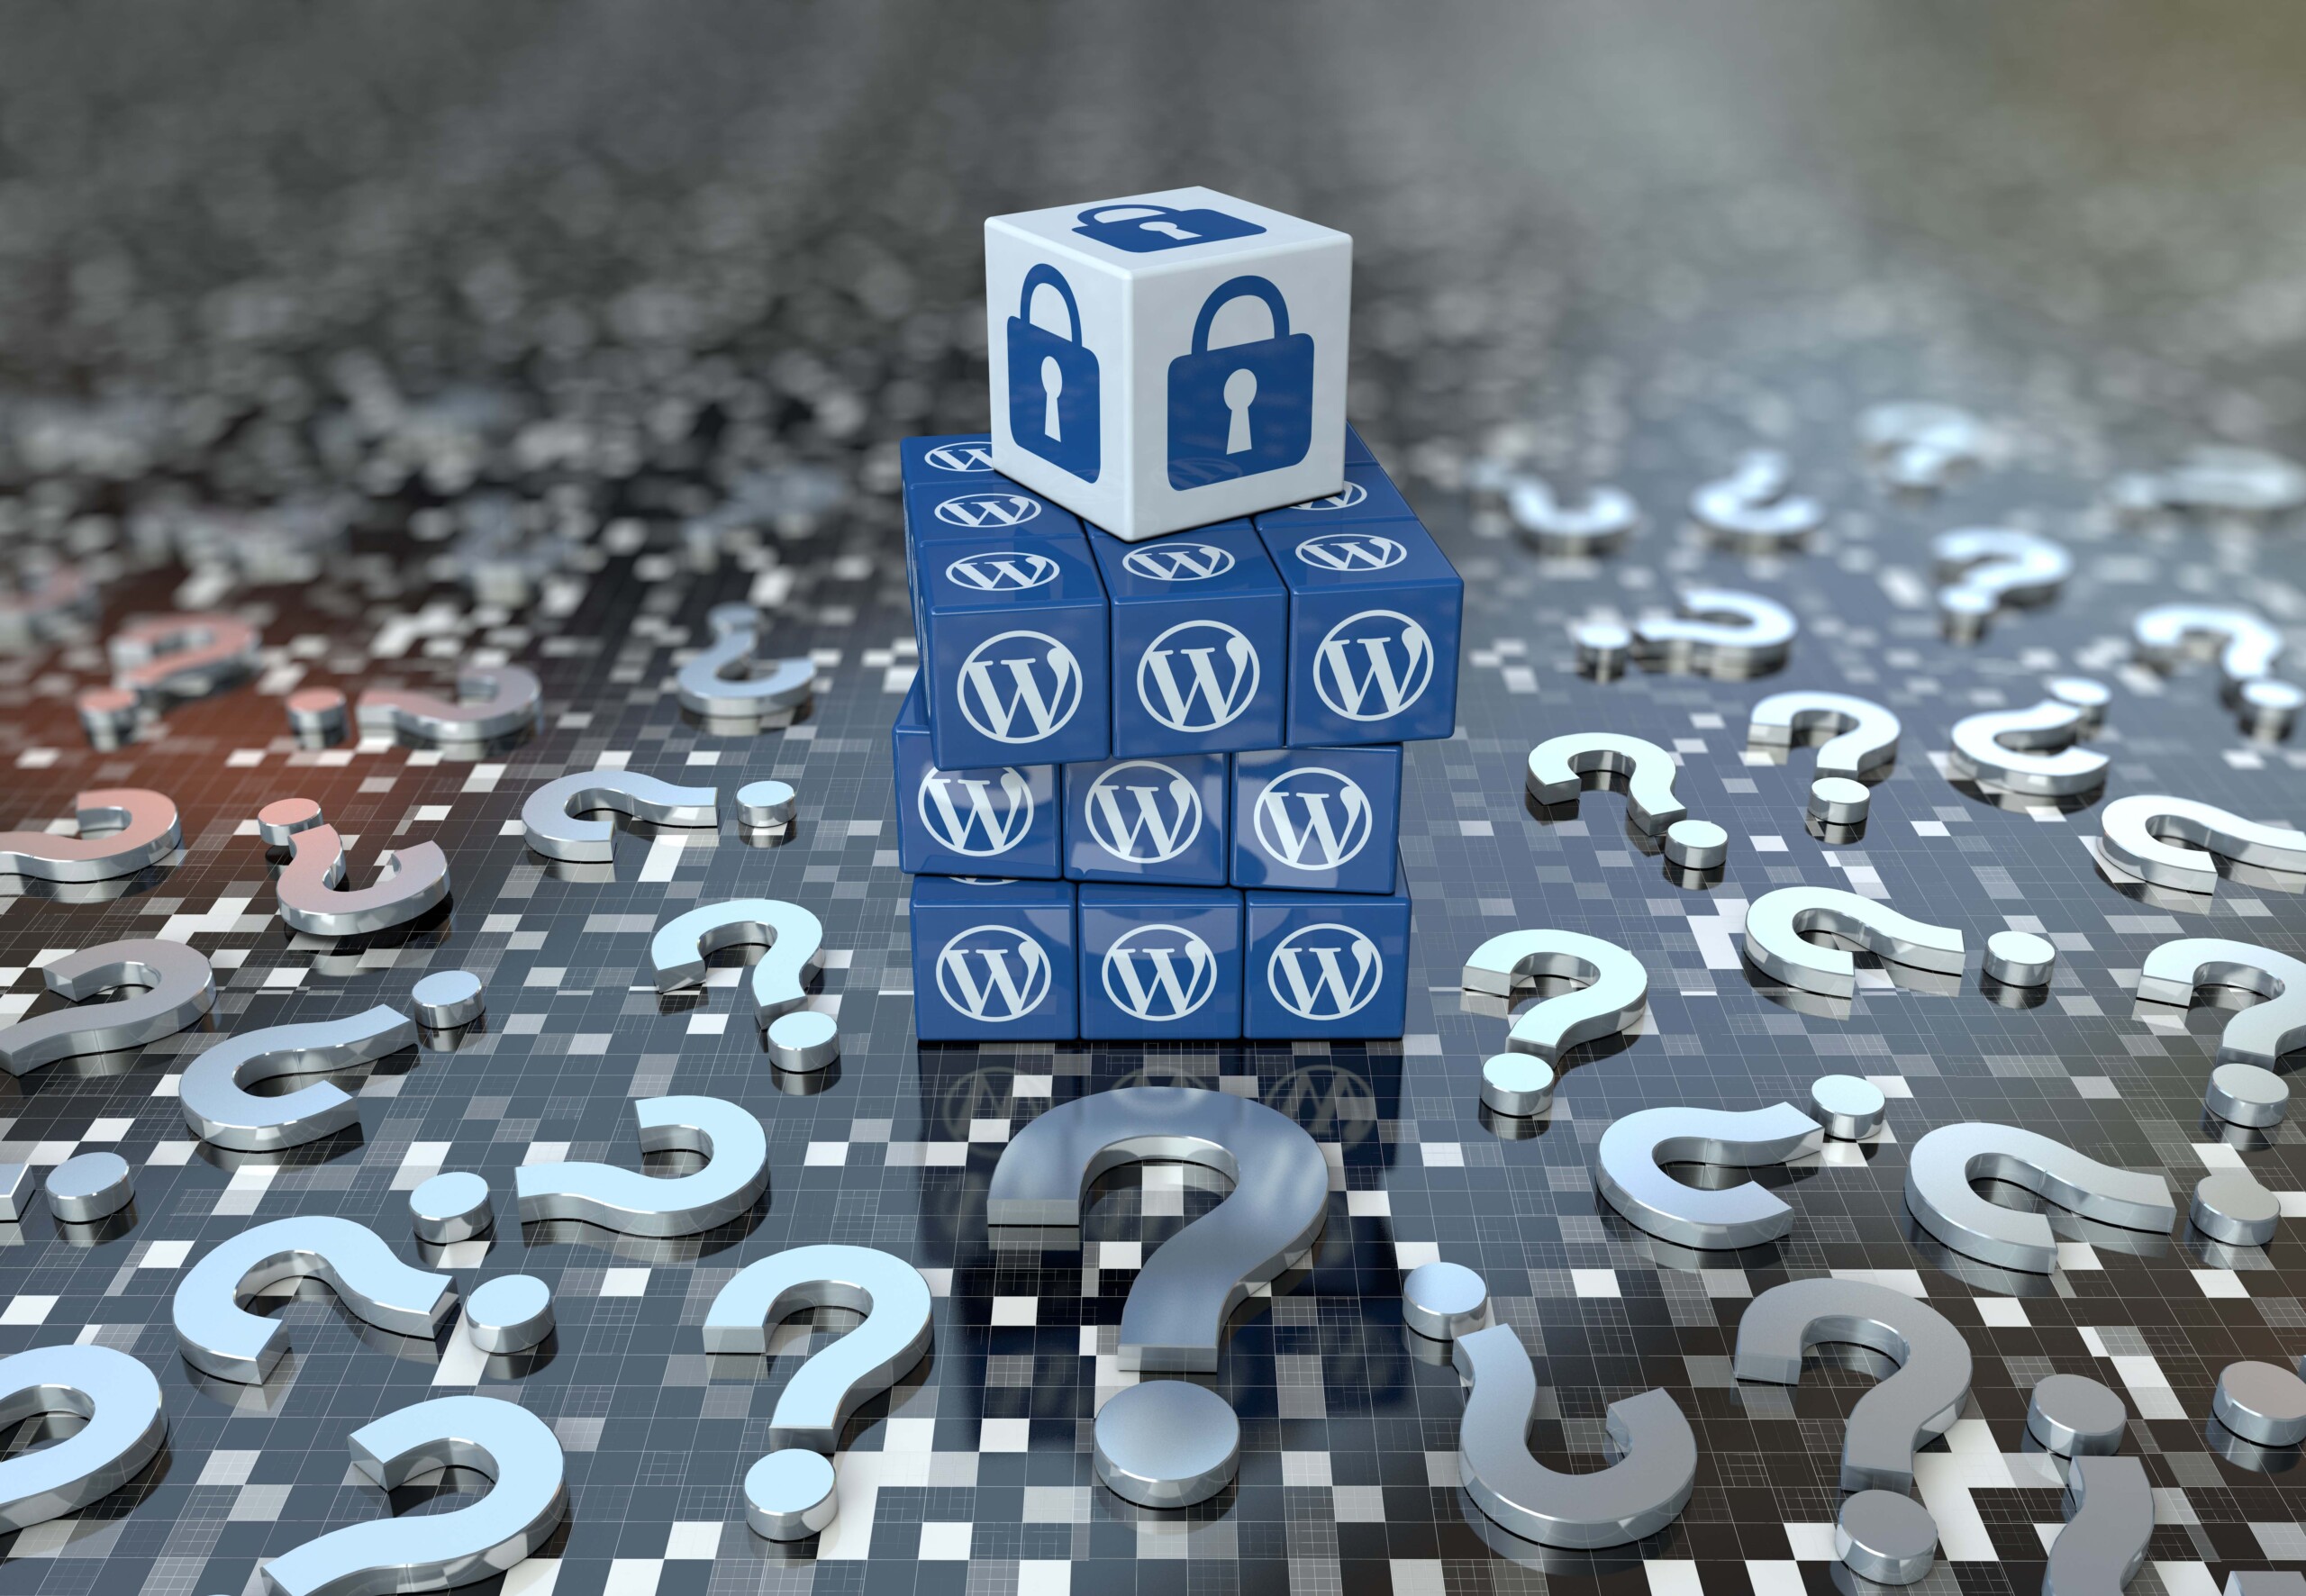 Blocks with the WordPress logo stacked up in a 3 by 3 by 3 formation, with a larger block with a lock icon on top, signifying security.